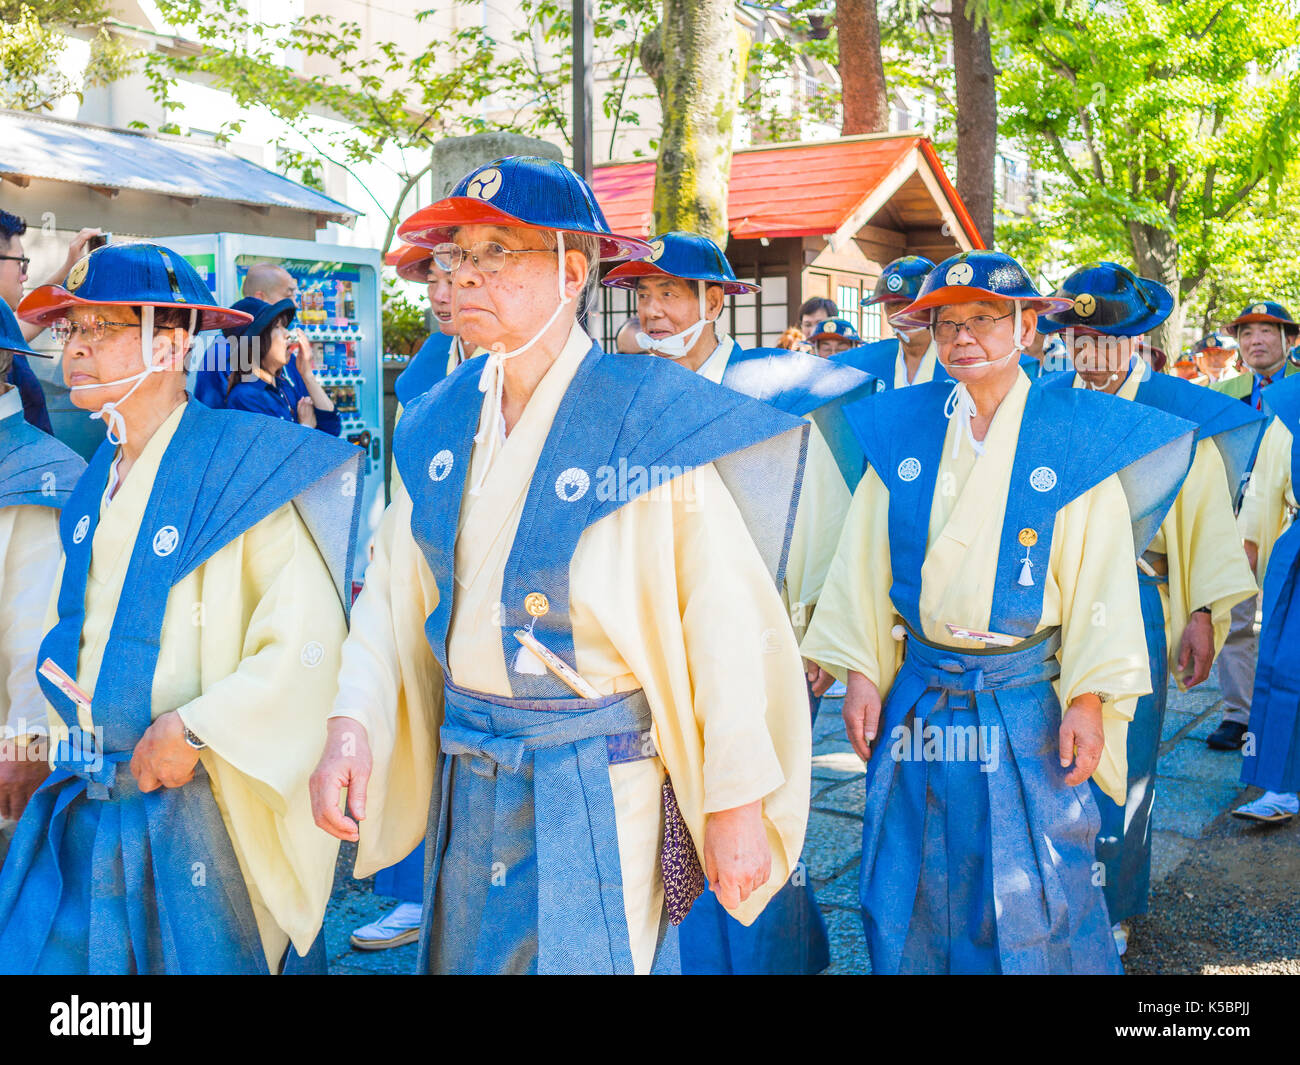 KUDAMATSU, JAPAN - AUGUST 23, 2017: Unidentified people in a parade in the streets of Japan Stock Photo